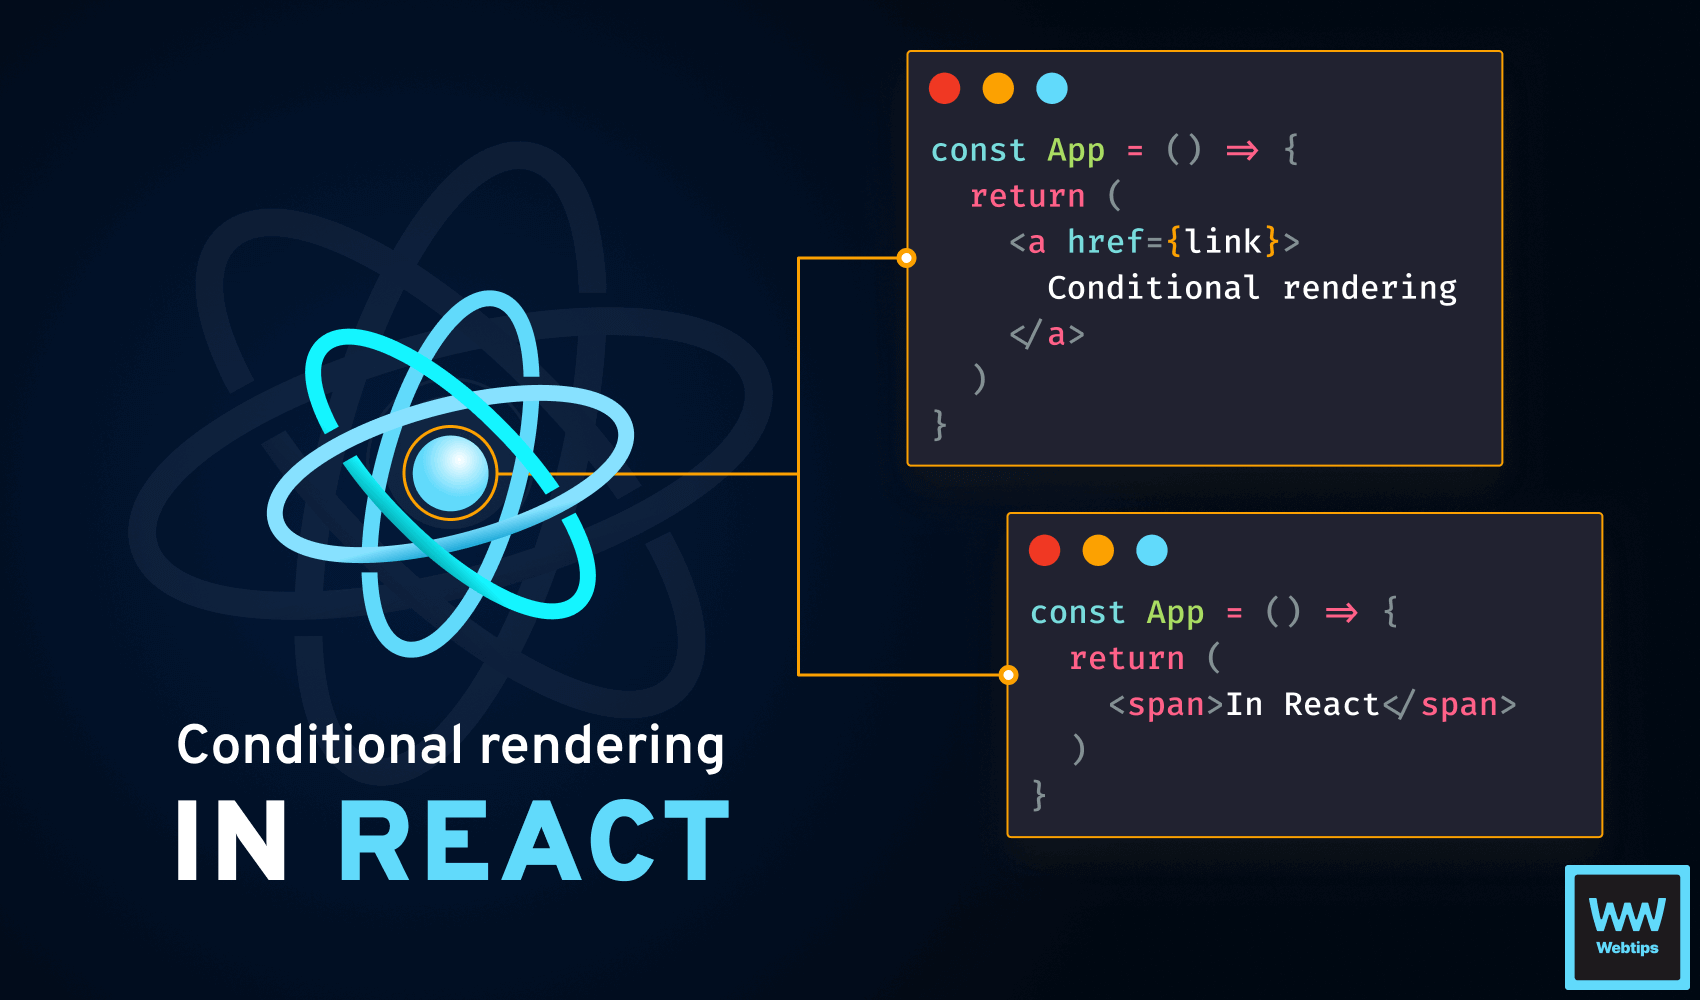 How to Render Anchors Without Href in React